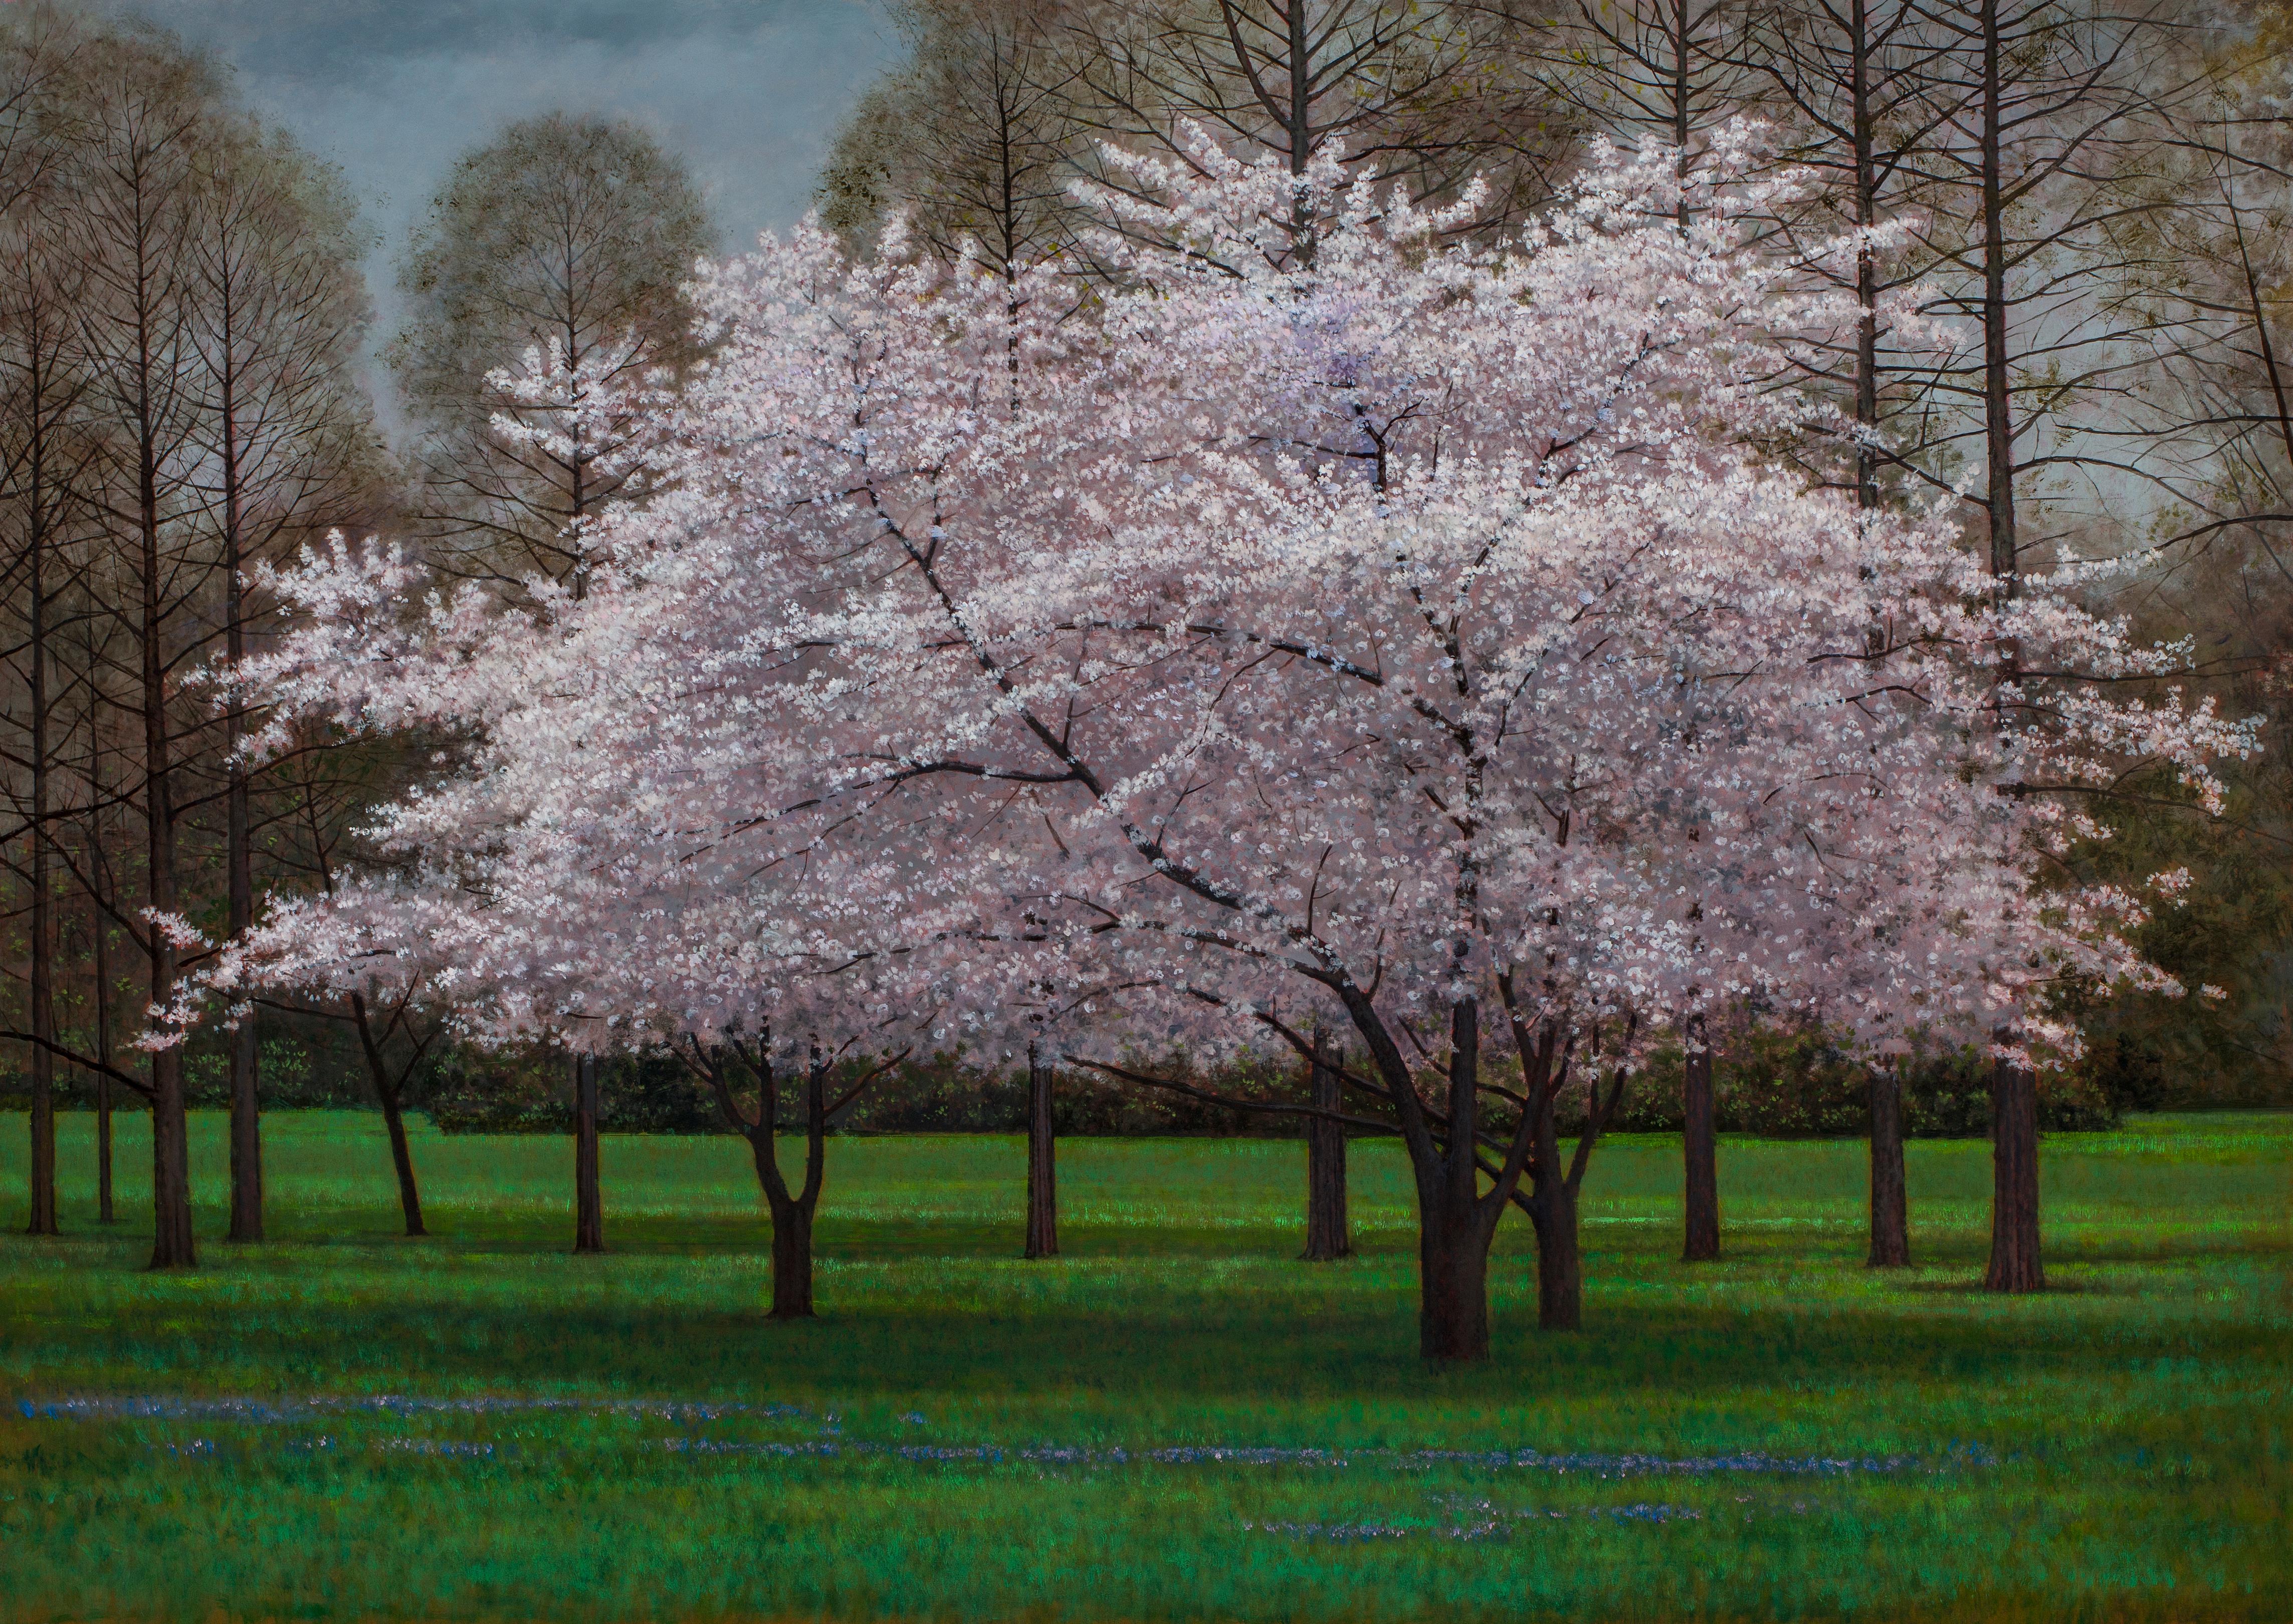 Jeff Aeling Landscape Painting - Crabapple - Spring Blooming Crabapple Tree in Green Grassy Clearing, Oil Paint